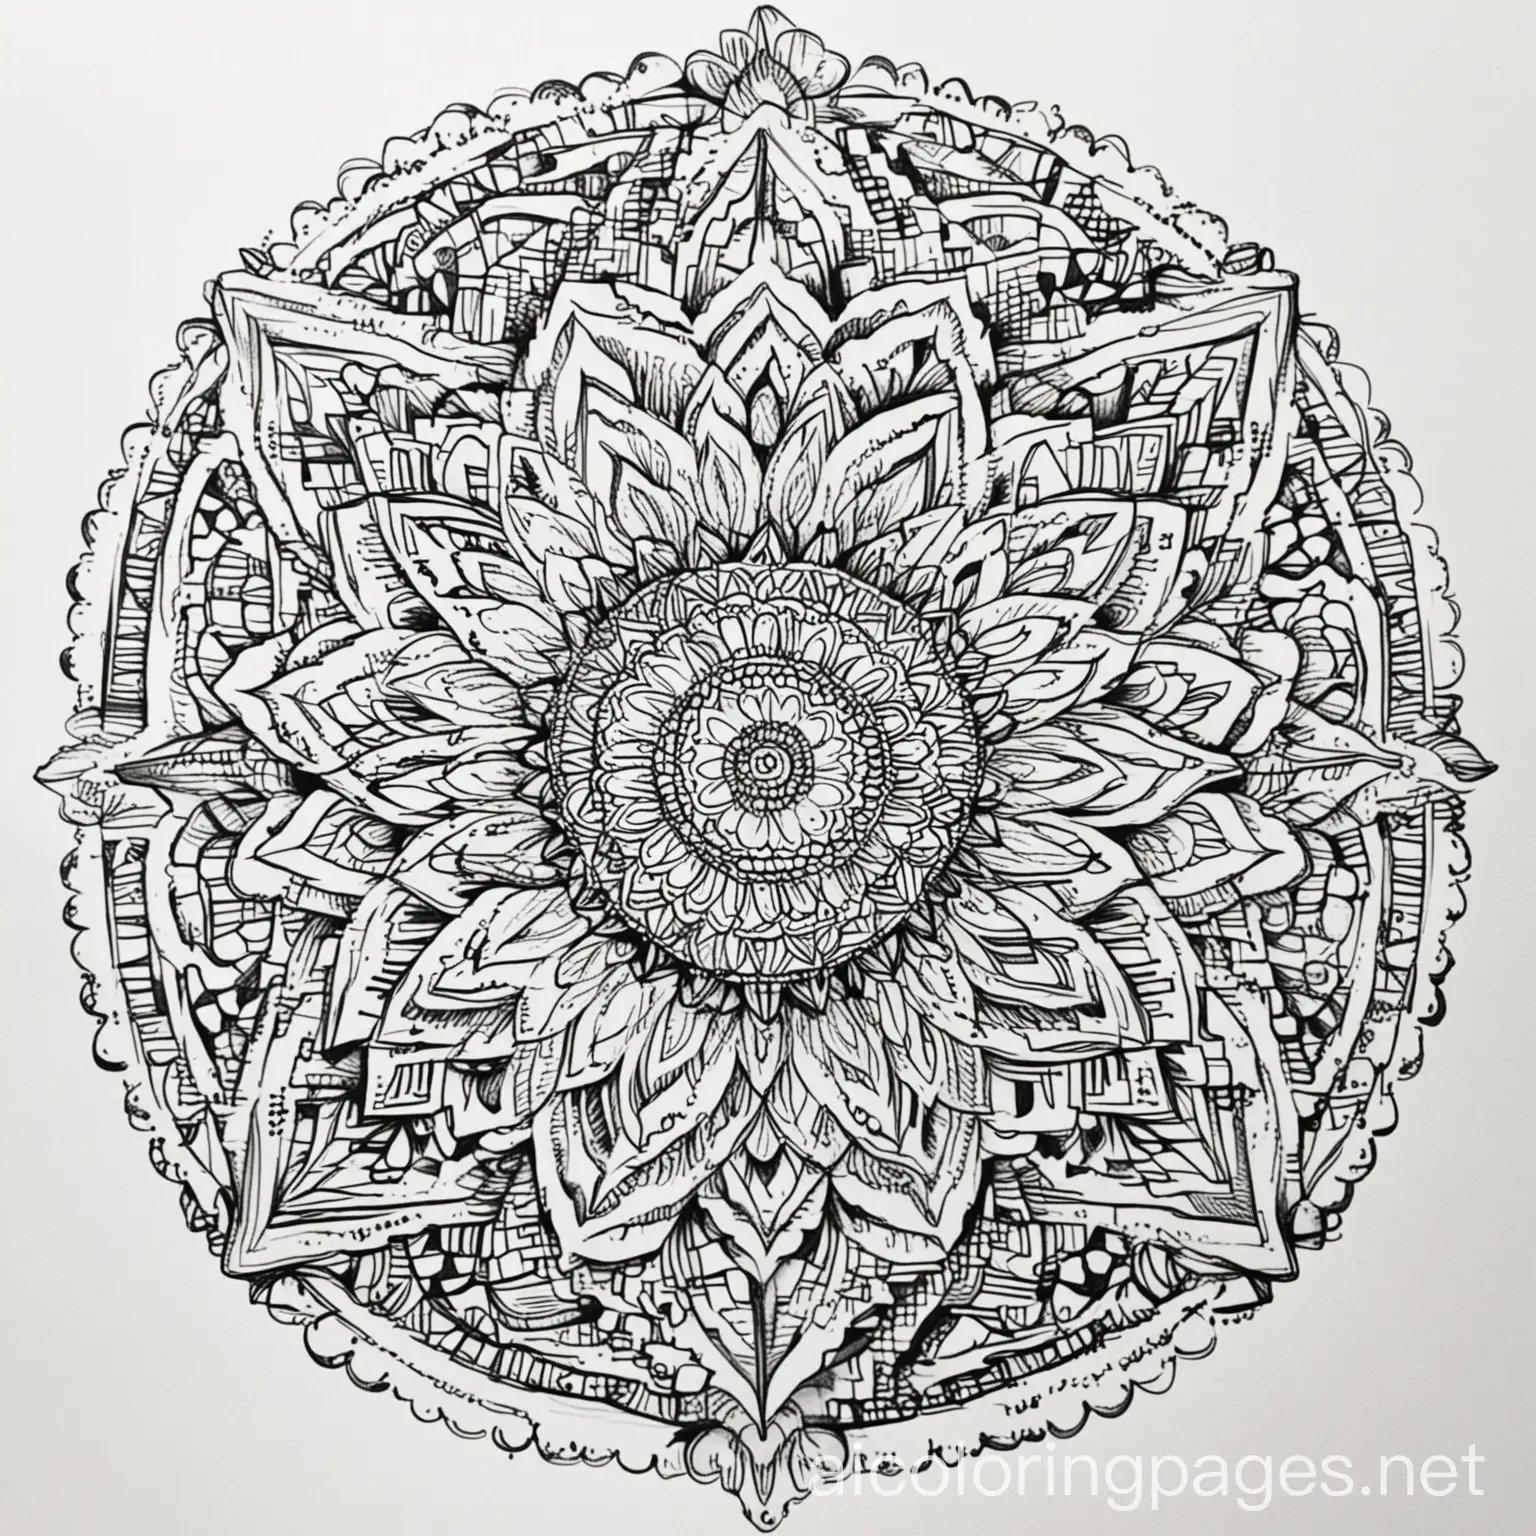 mandala art, Coloring Page, black and white, line art, white background, Simplicity, Ample White Space. The background of the coloring page is plain white to make it easy for young children to color within the lines. The outlines of all the subjects are easy to distinguish, making it simple for kids to color without too much difficulty